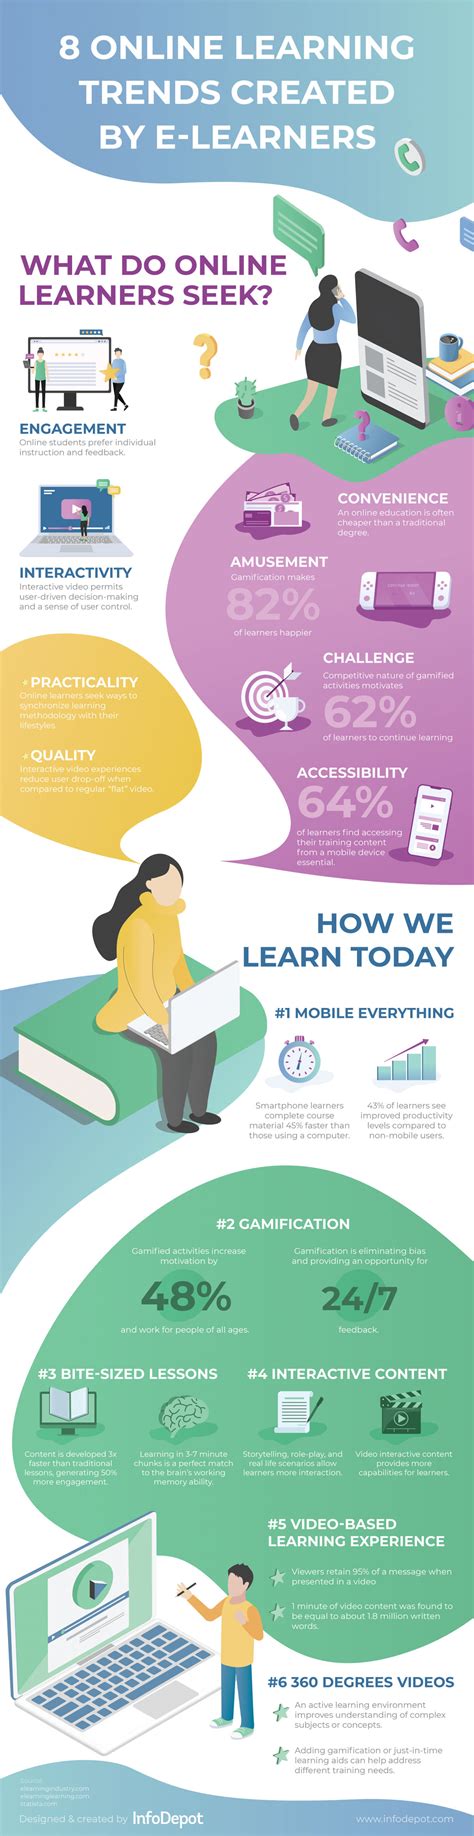 8 Online Learning Trends Created By Elearners Infographic